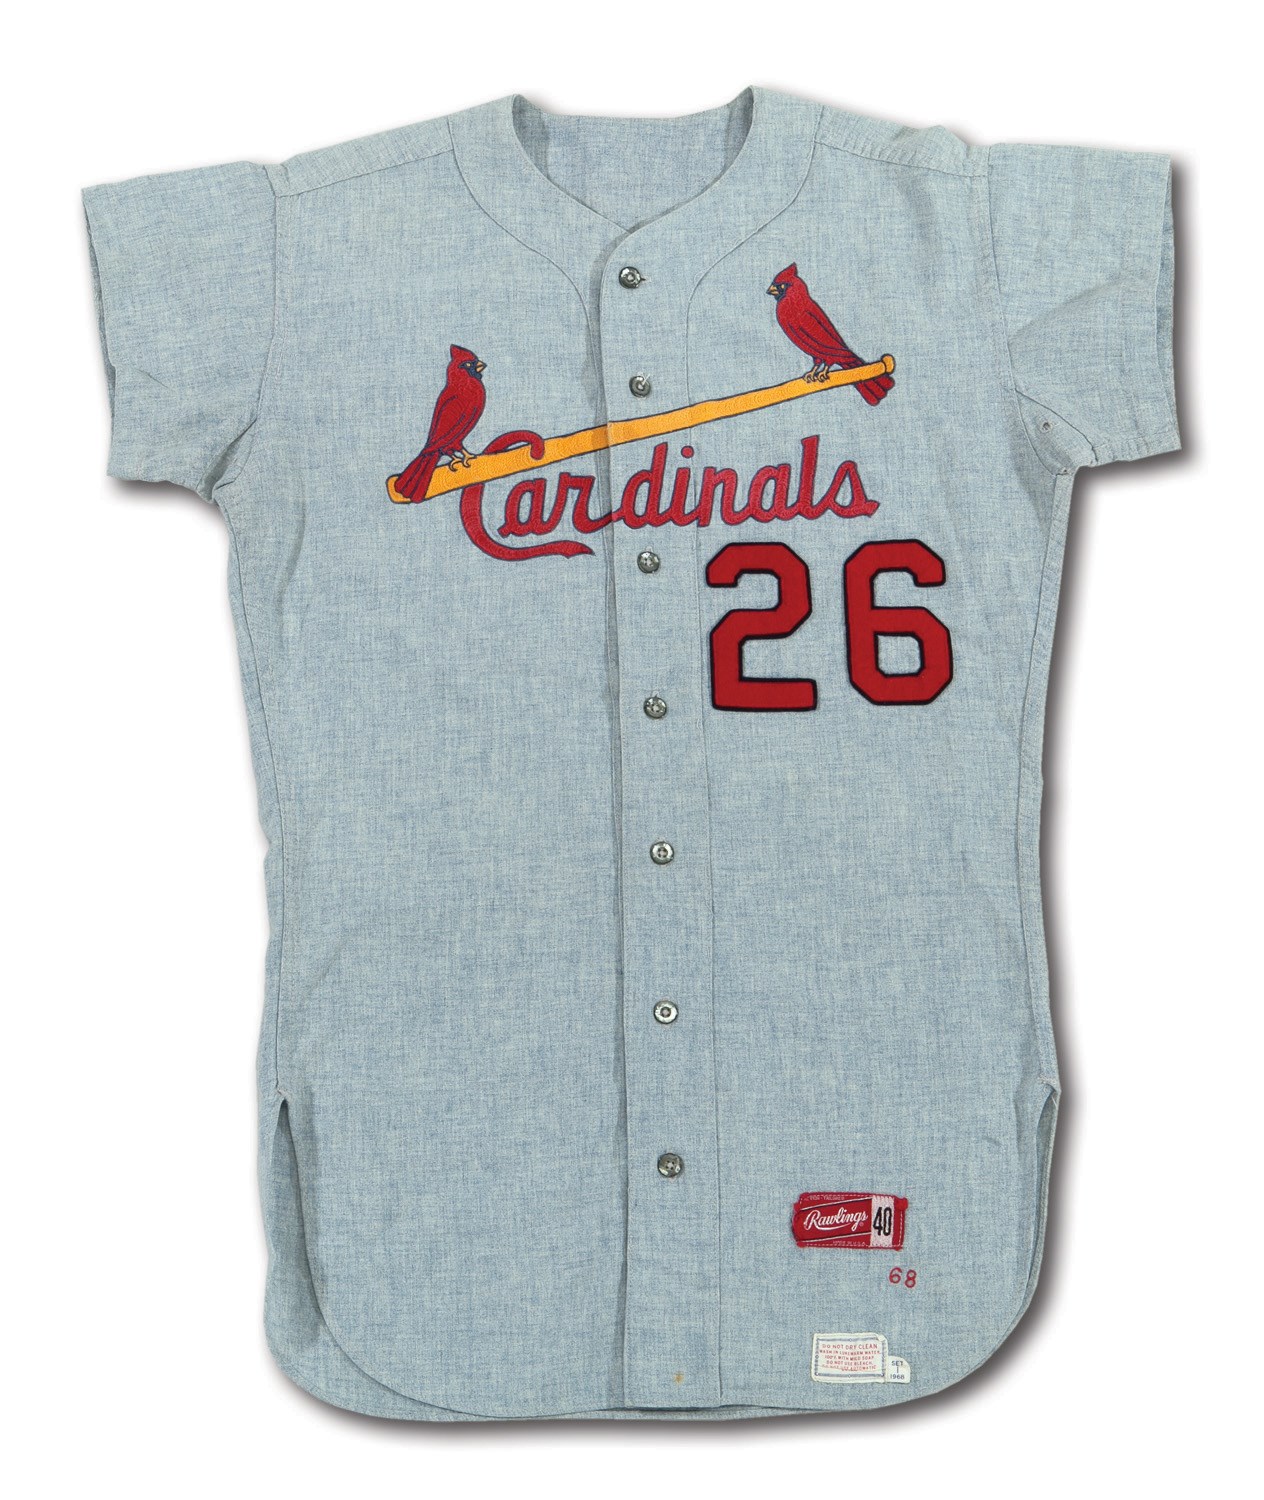 St. Louis Cardinals - We're digging these 1968 throwback jerseys